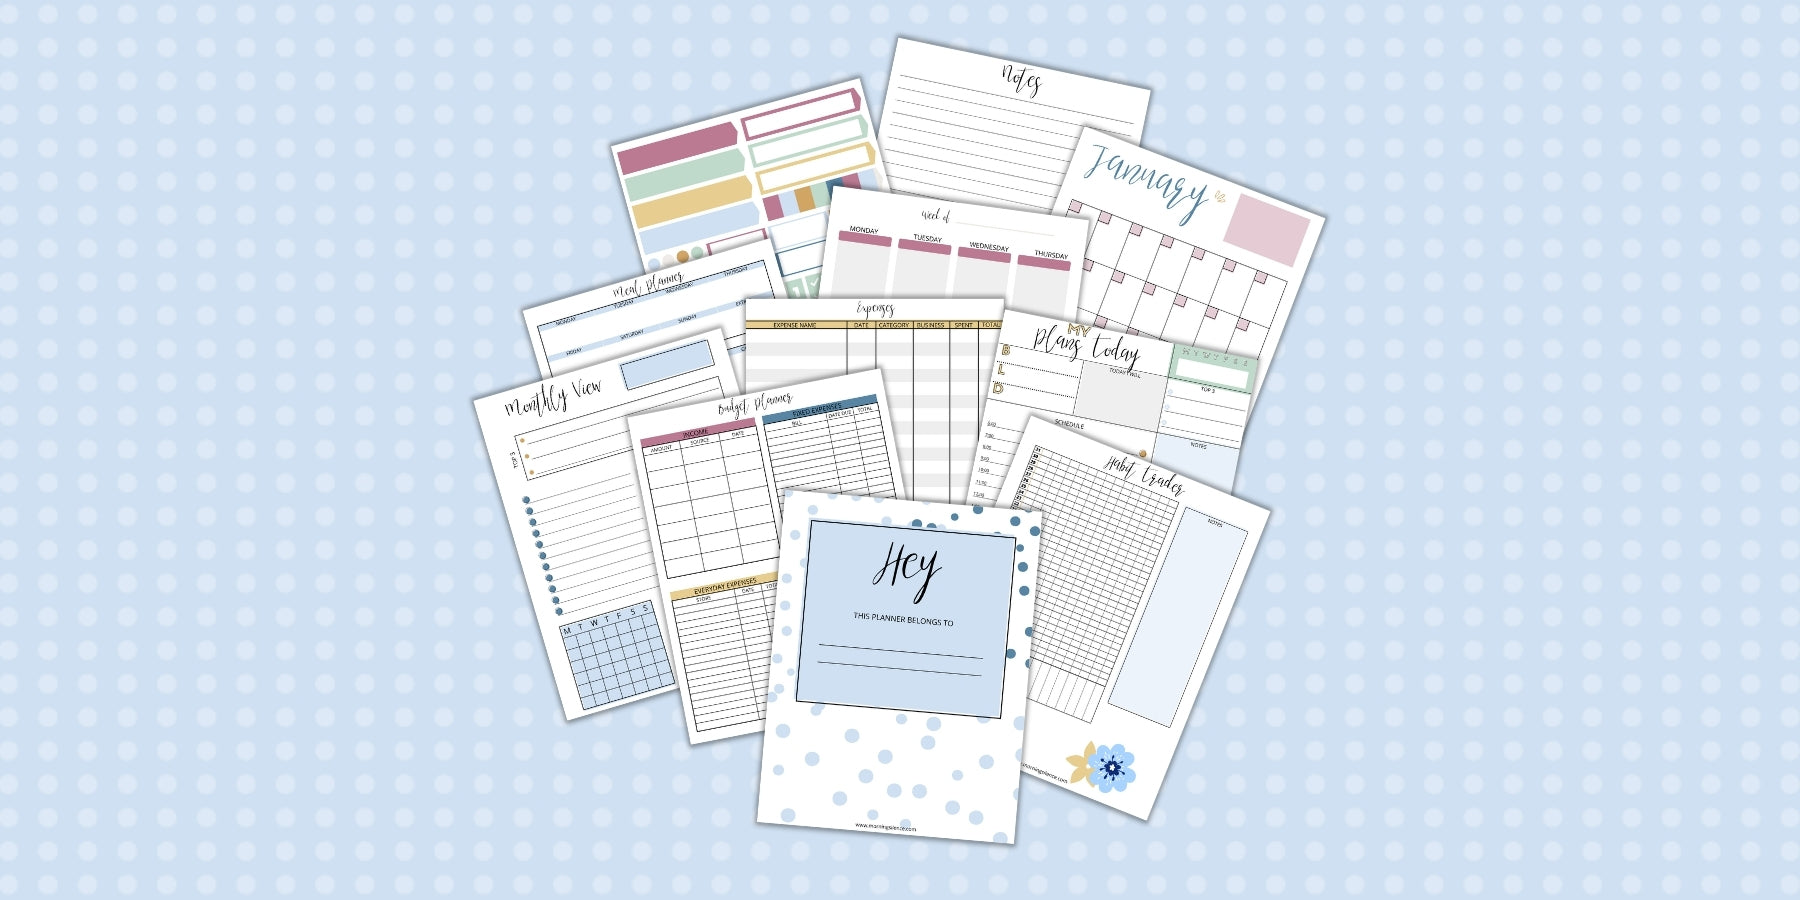 Planner printable pages including weekly, monthly, and daily inserts as well as habit tracker, meal planner, budget planner pages and more.